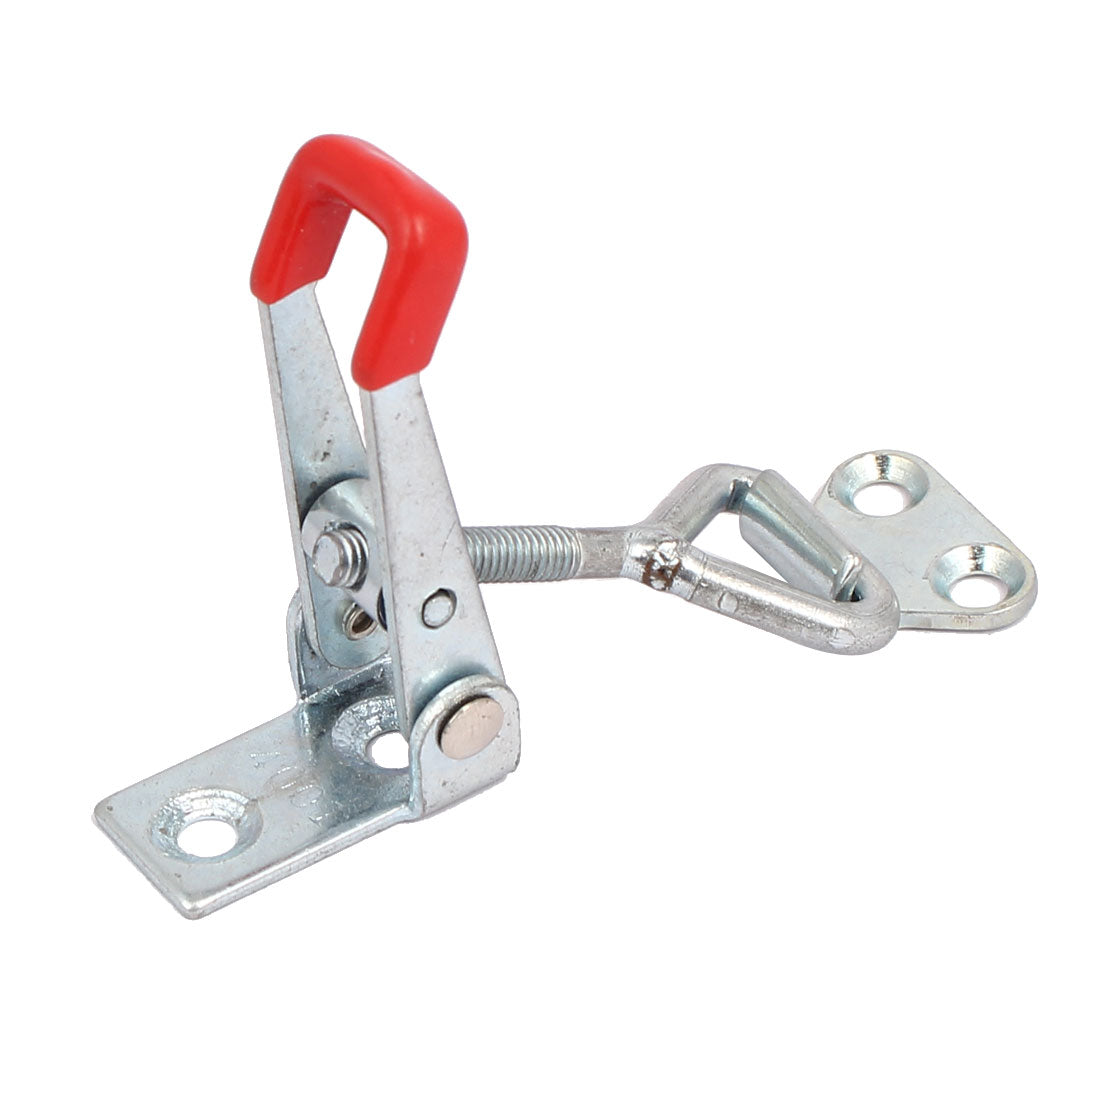 Uxcell Uxcell 4001 Carbon Steel Zinc Plated 100kg Holding Capacity Toggle Clamp Latch Hardware Fitting